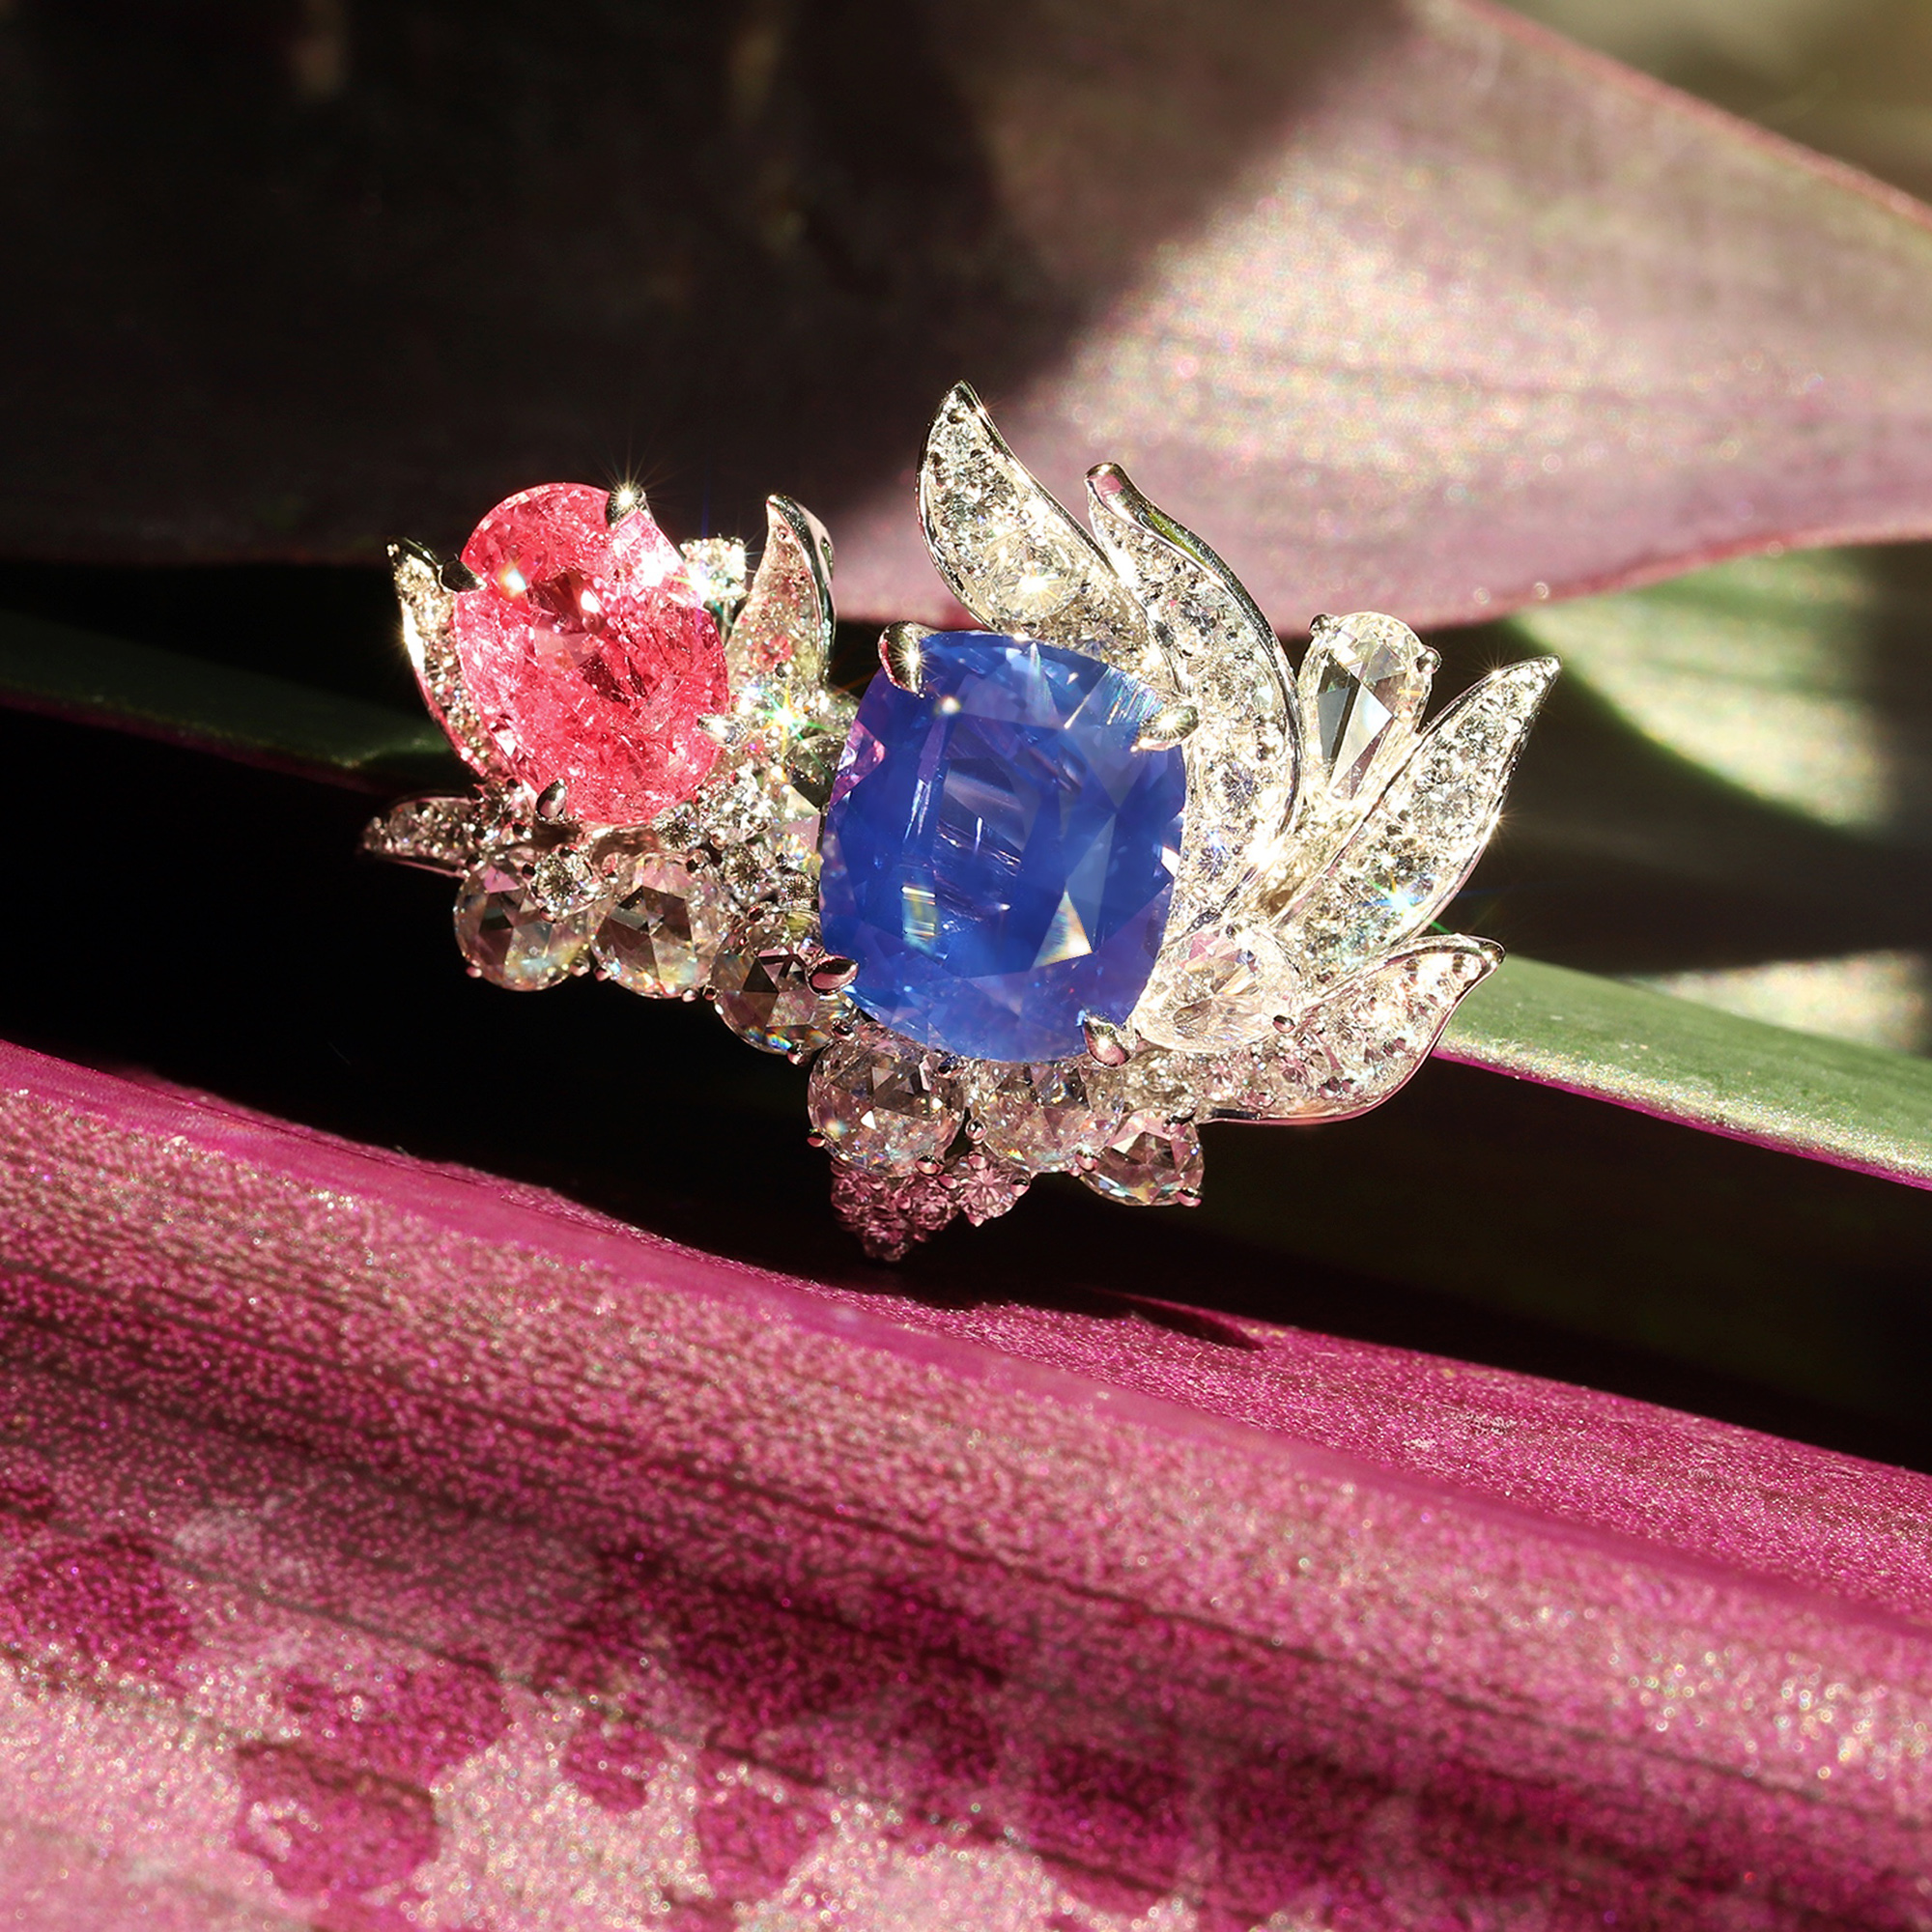 The Beauty and Diversity of Sapphires